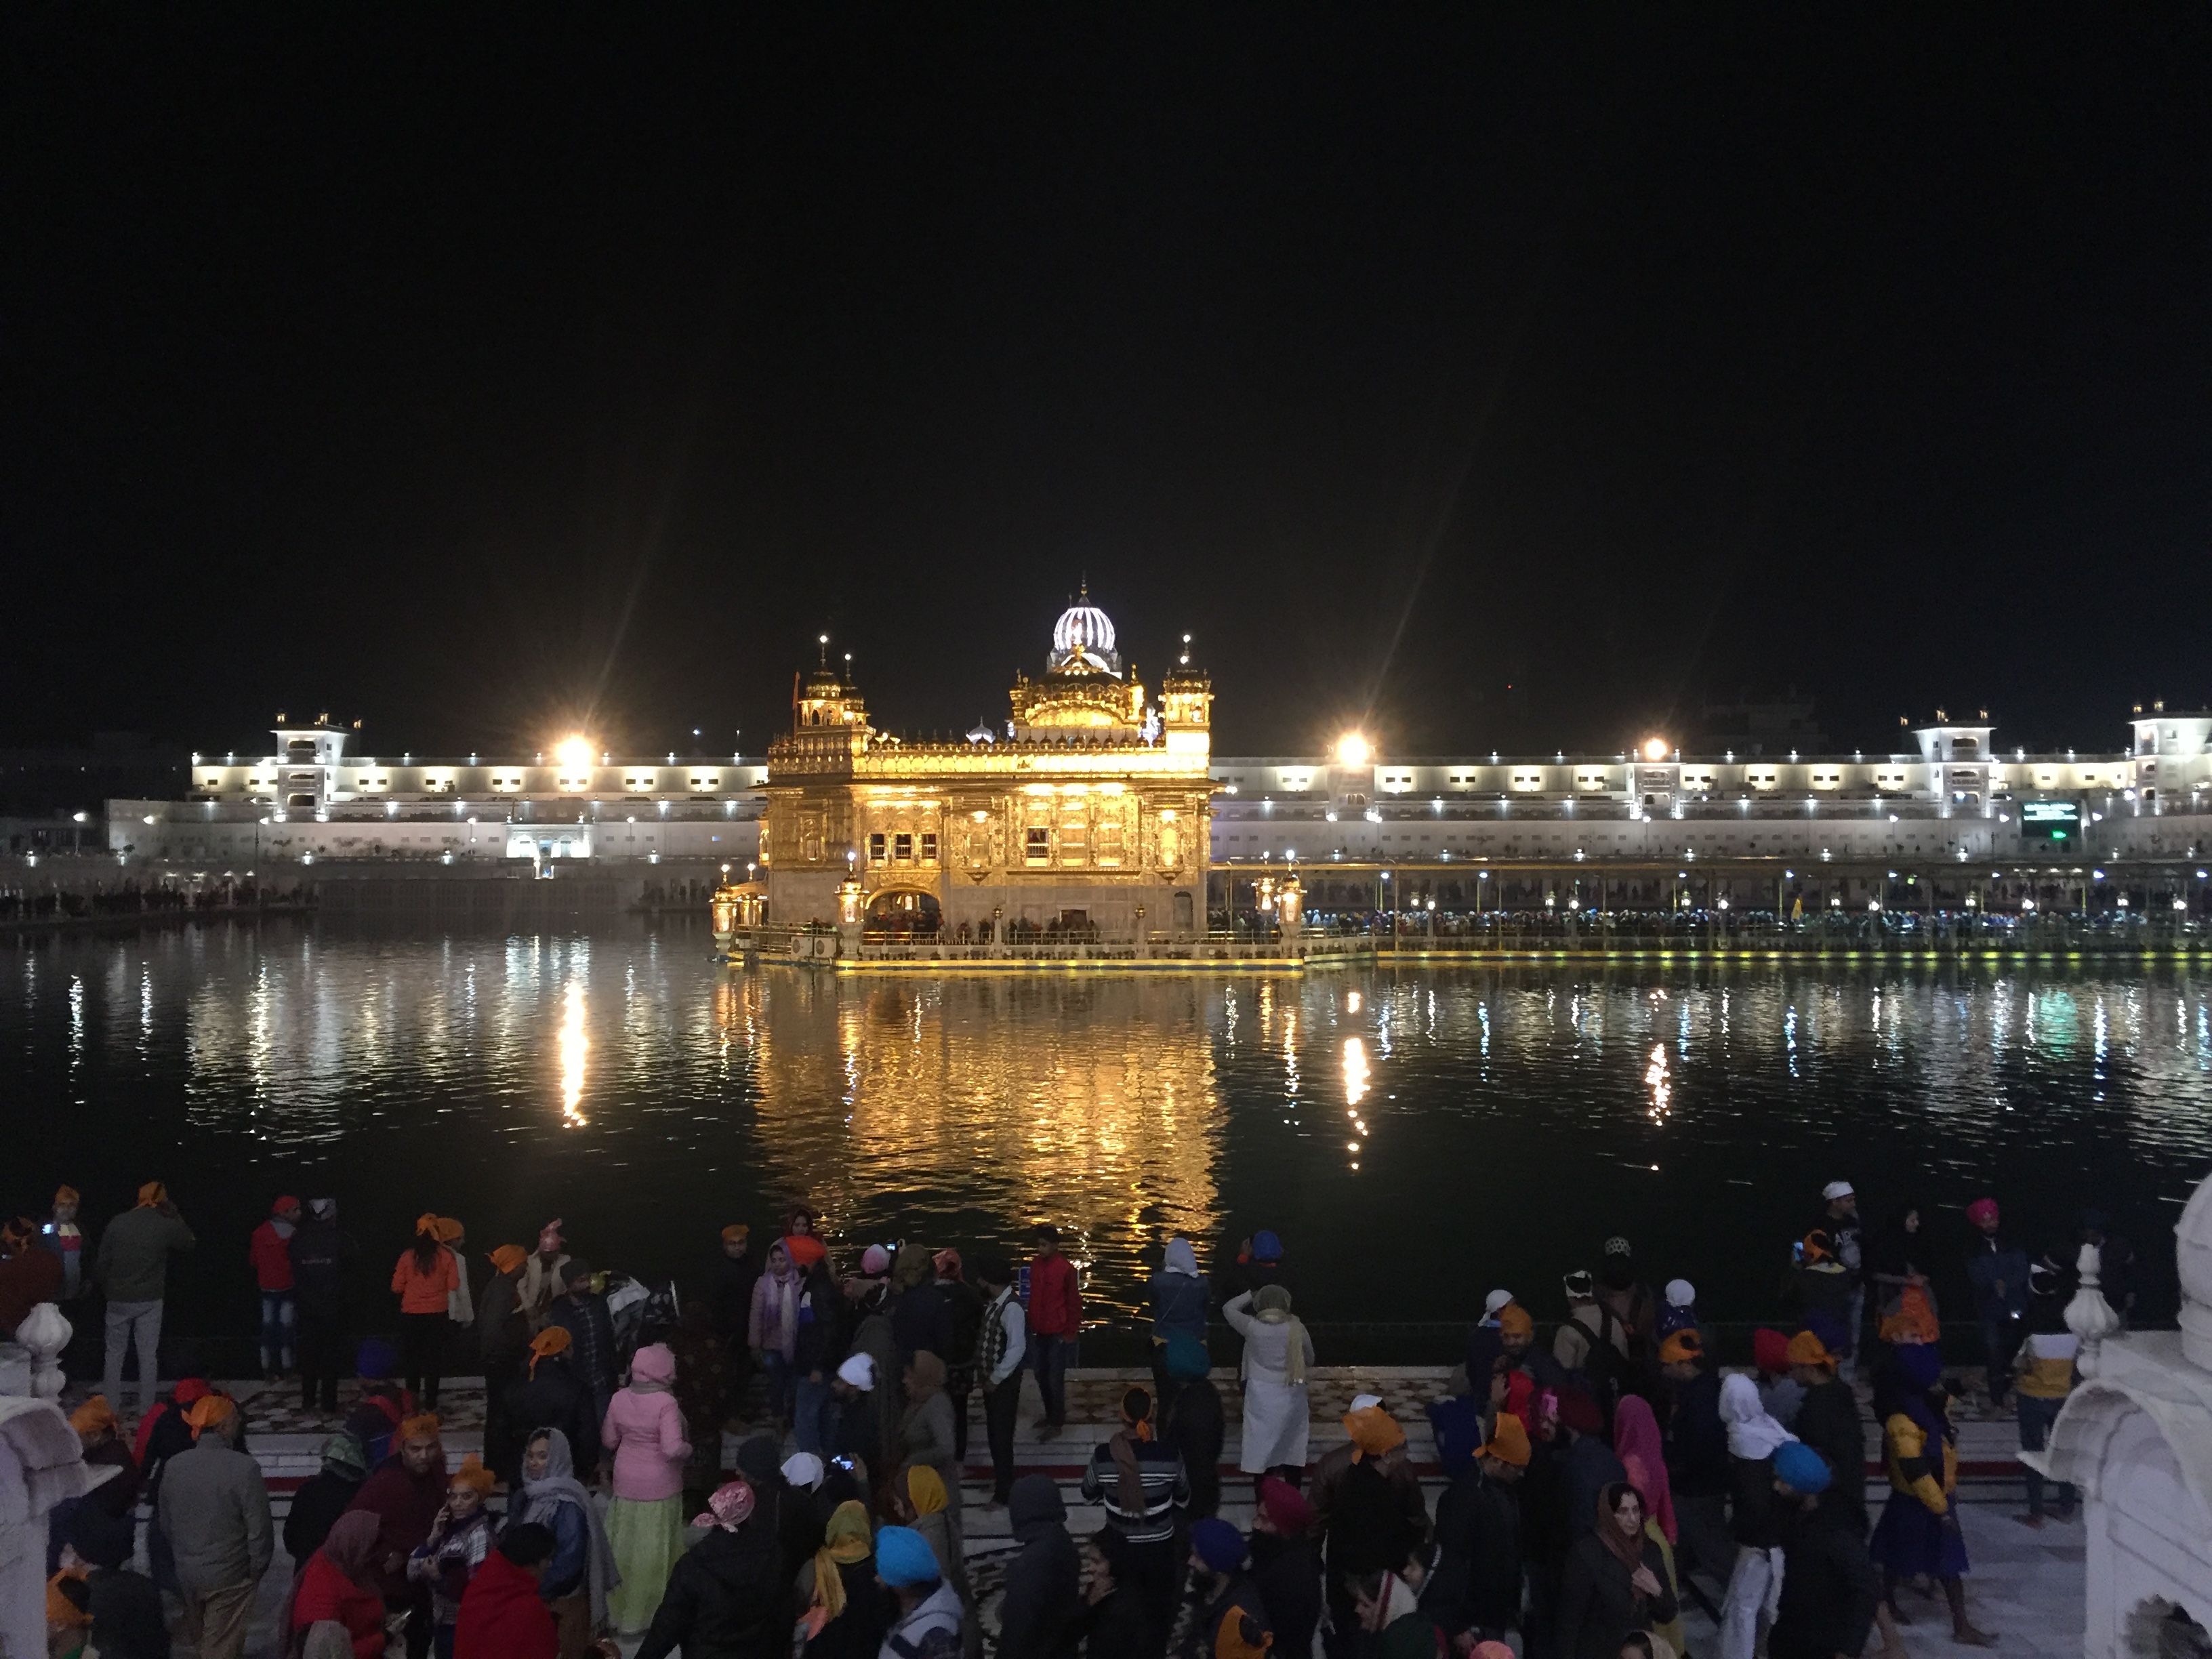 Caption: A photo of the view of the Golden Temple in Amritstar, India captured at night from across the water. (Local Guide @Harmandir Sahib)